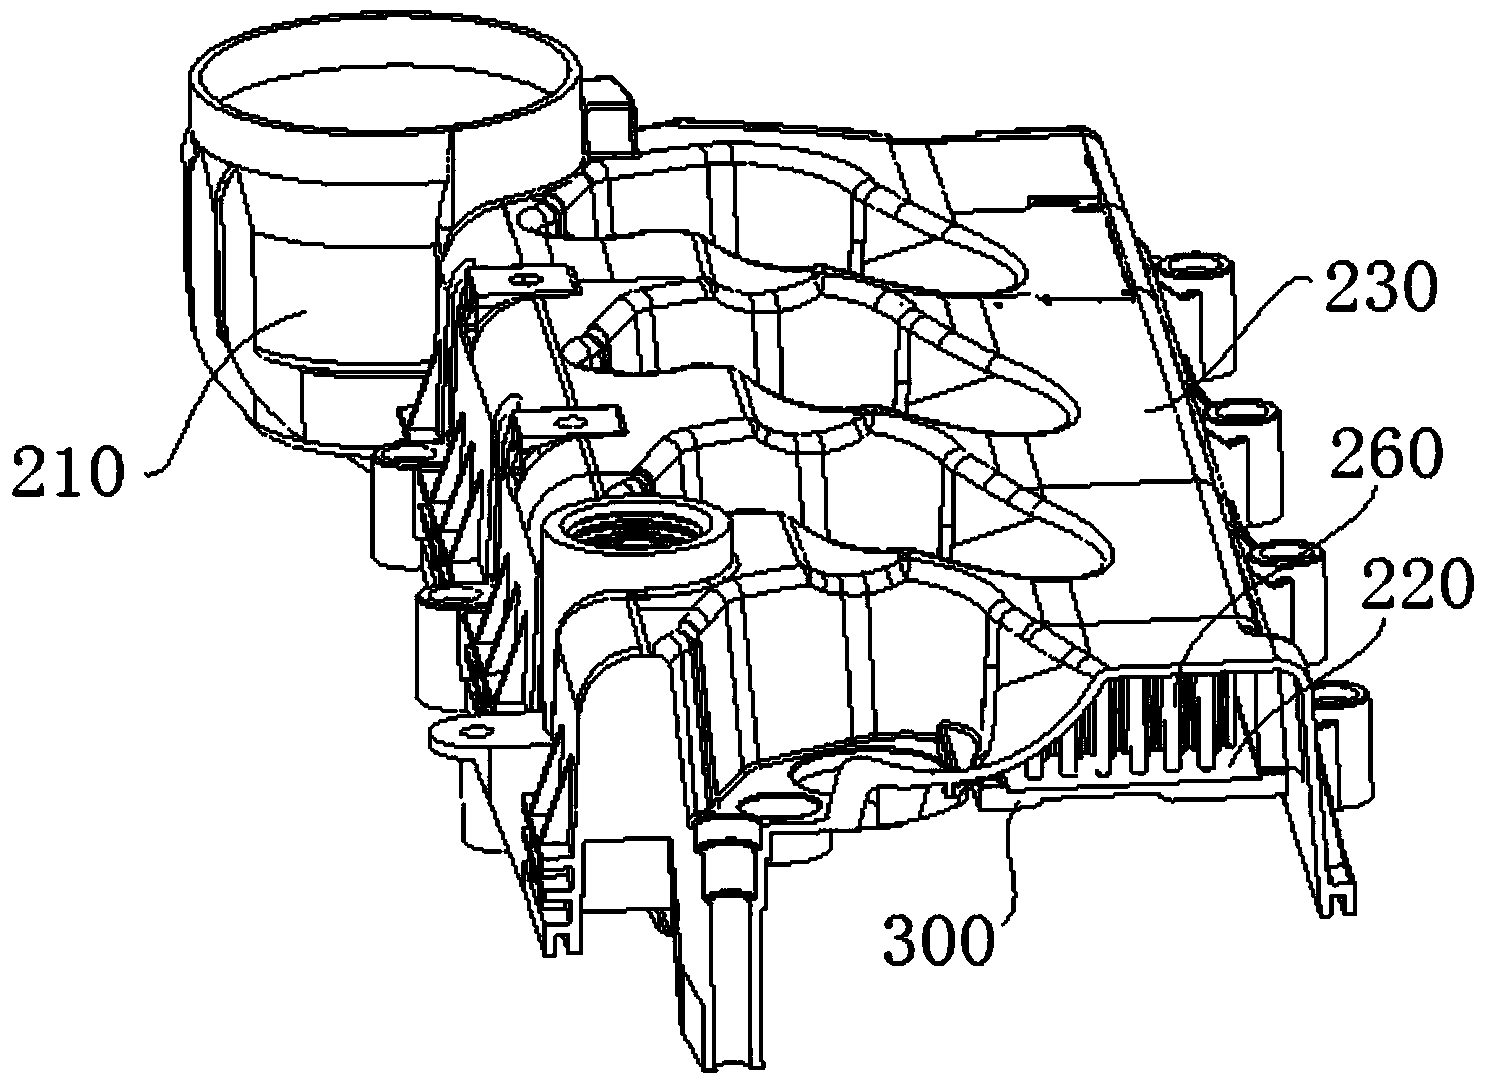 Engine cylinder cover shield and crankcase ventilation system